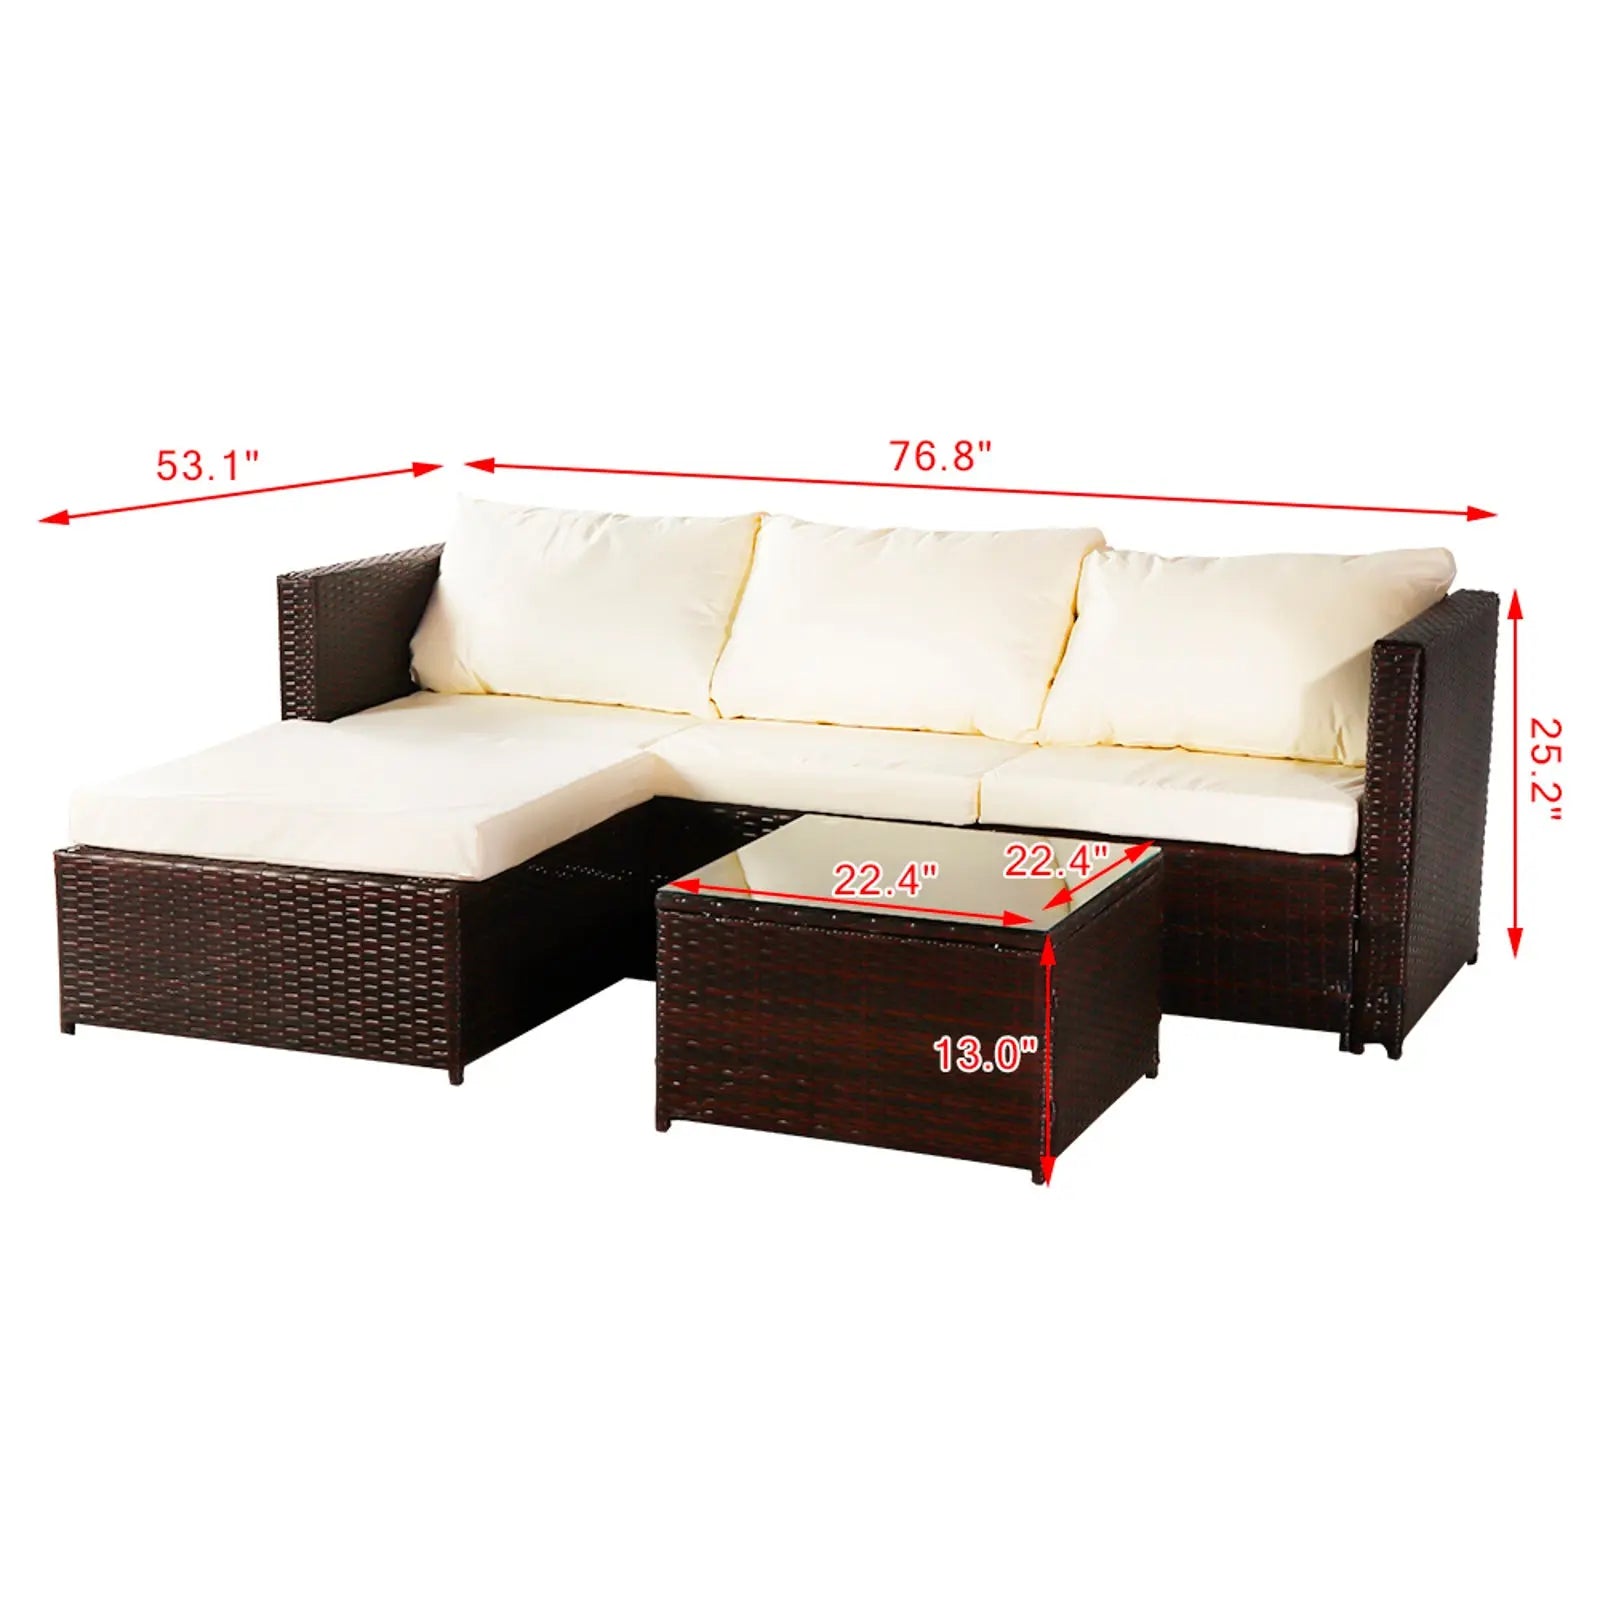 Three-piece Conjoined Sofa Pedal Coffee Table Brown (Combination of 2 Boxes) - Image #3